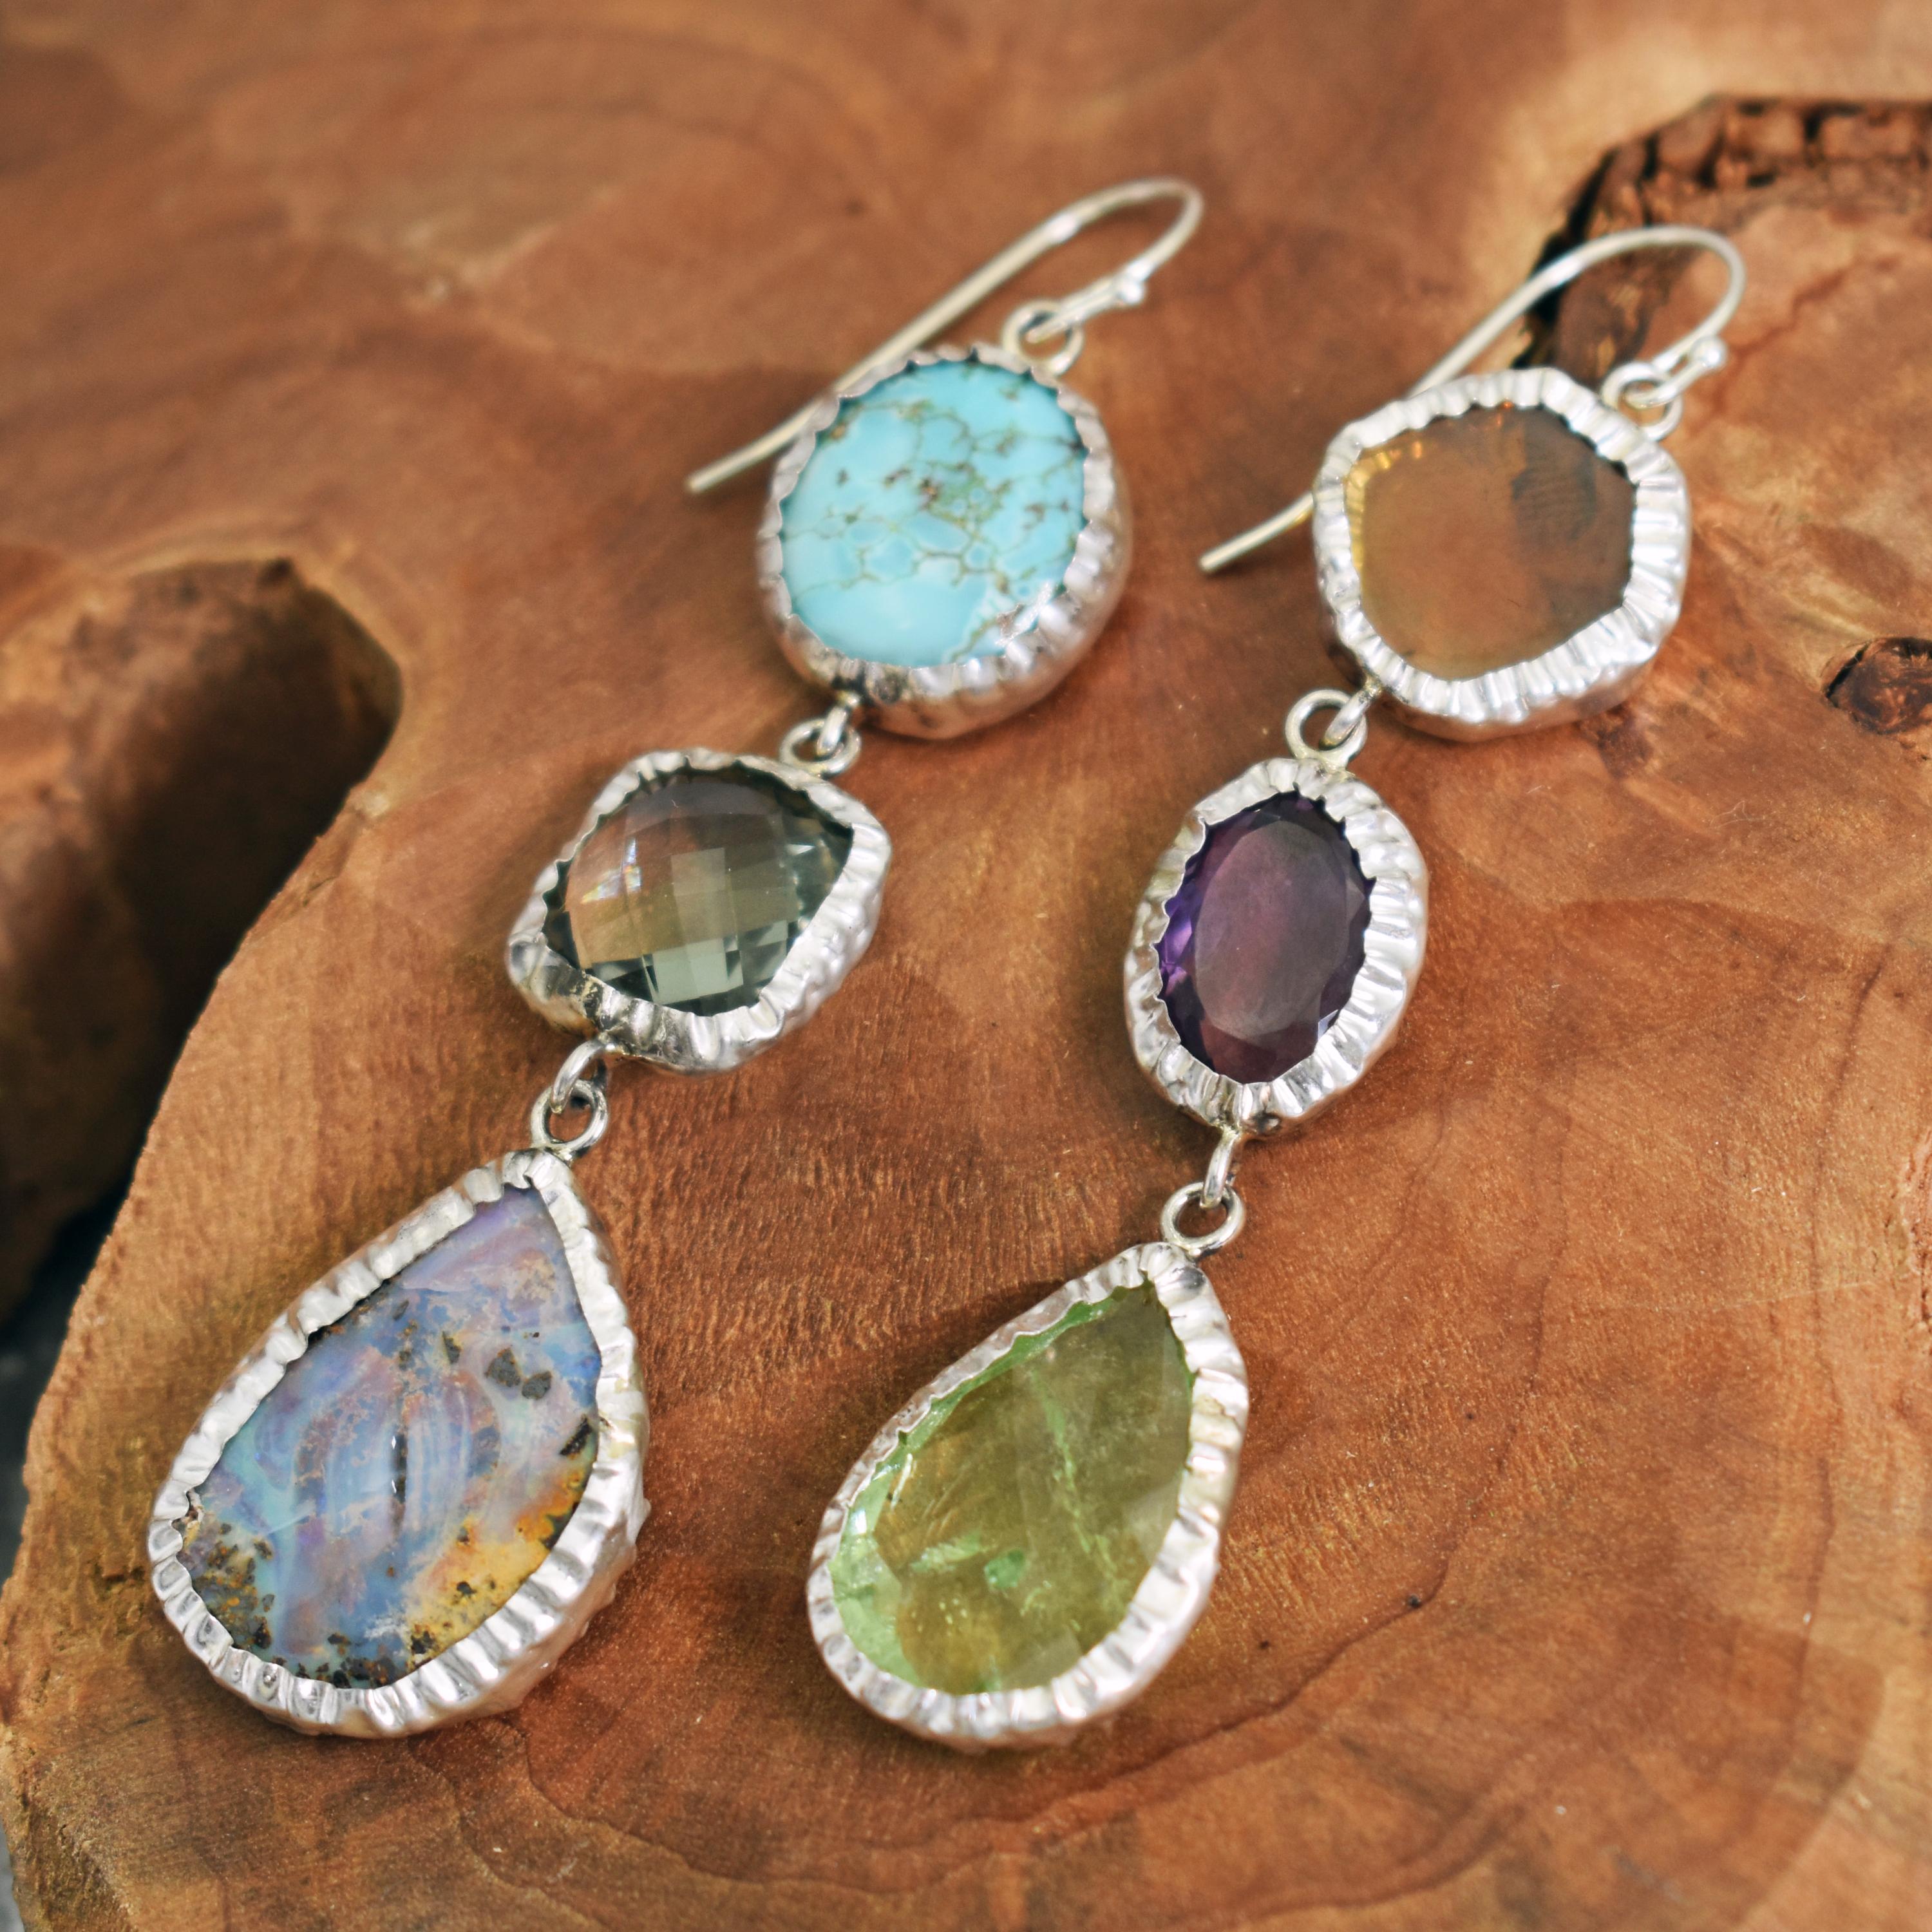 Three tier sterling silver asymmetrical dangle earrings featuring orange Tourmaline slice, Amethyst, yellowish green rose-cut Tourmaline, Carico Lake Turquoise, Green Quartz and Australian Boulder Opal gemstones. Dangle earrings are 3.13 inches in